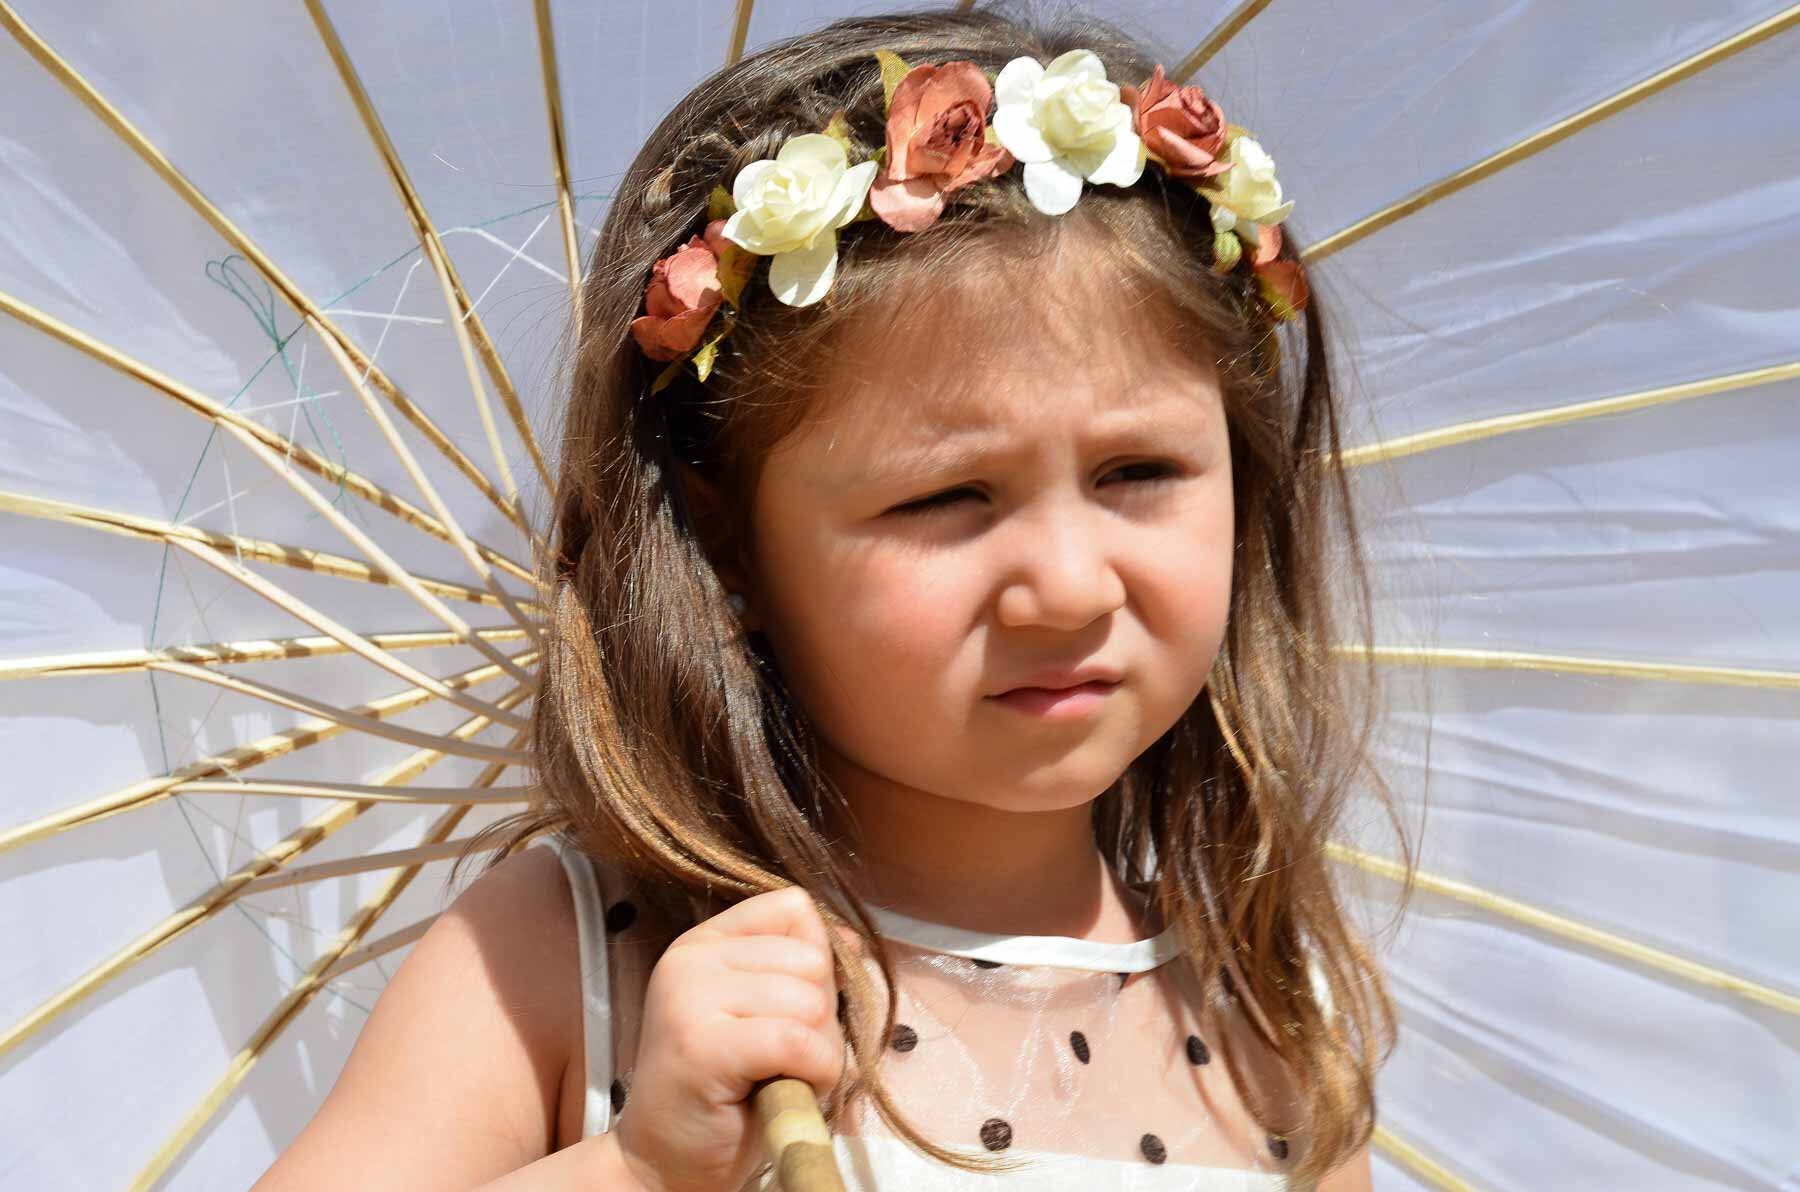  A young girl at a summer wedding. 